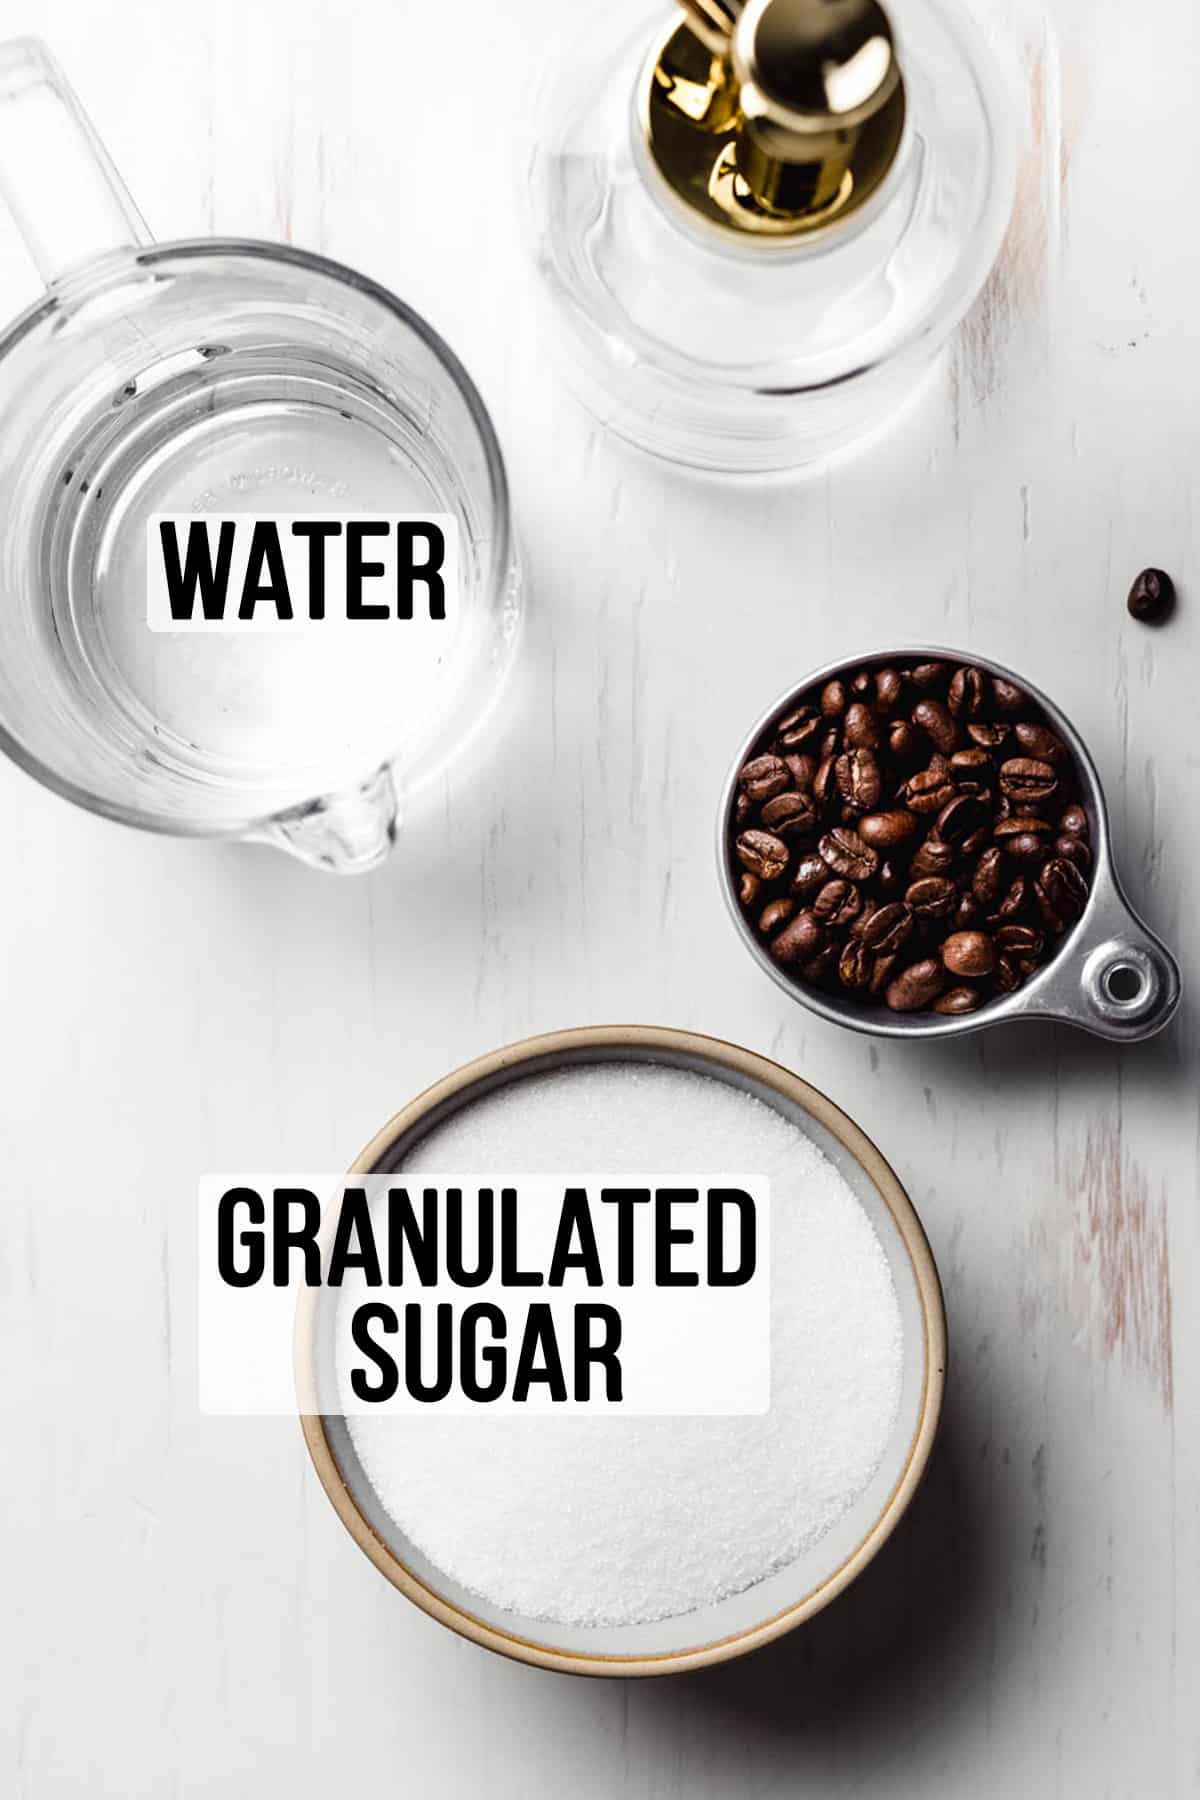 Granulated sugar in a bowl next to a measuring cup with water, coffee beans, and a glass pump jar.